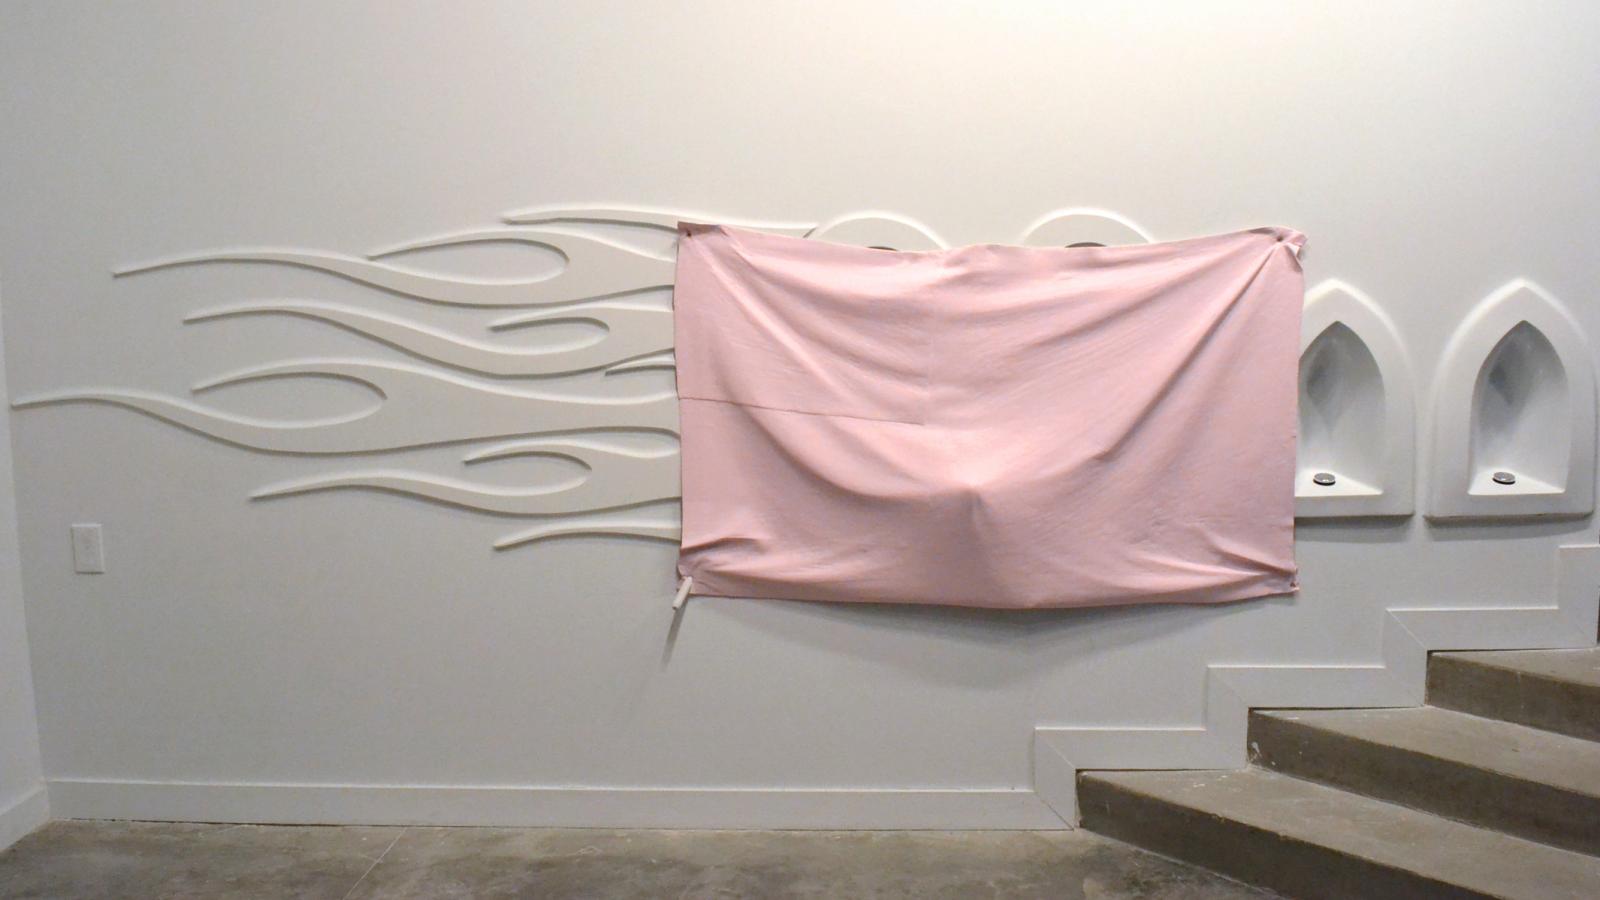 Michael Goodson: "00(pink flag)," MDF, Aqua Resin, joint compound, polystyrene, latex paint, 2013